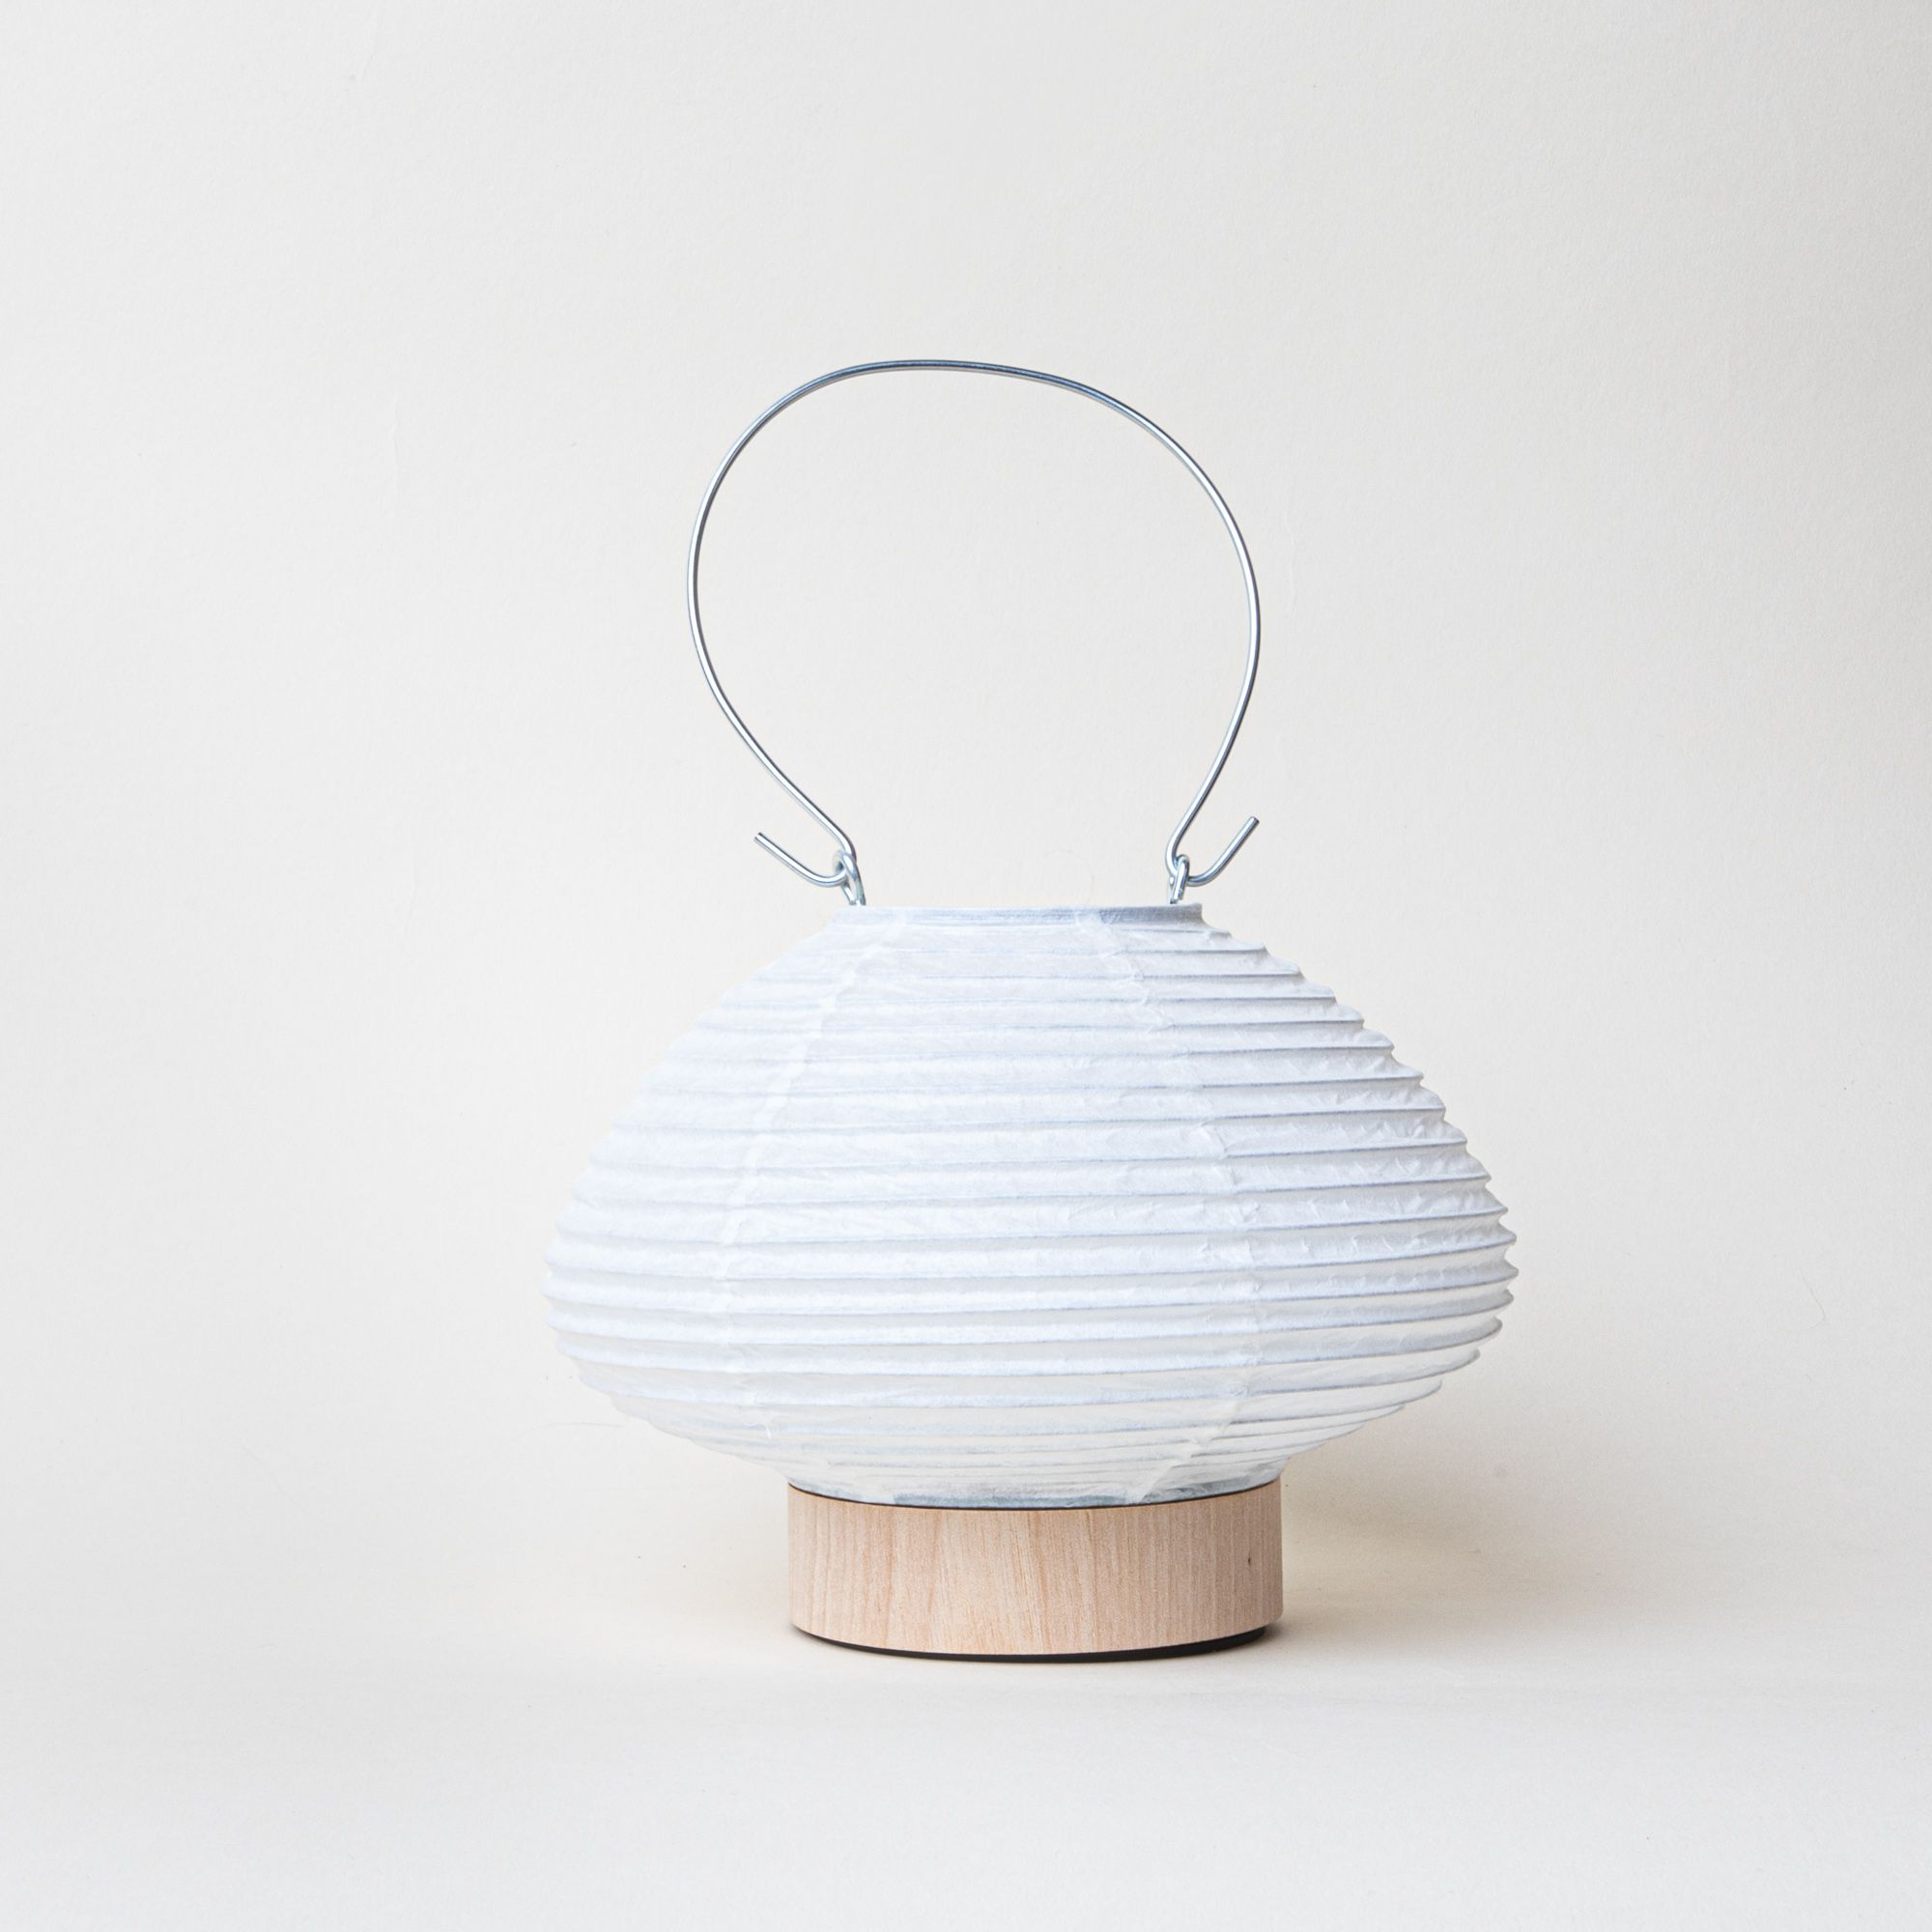 White paper lantern in a short horizontal oval shape with a wood base and a thin metal handle